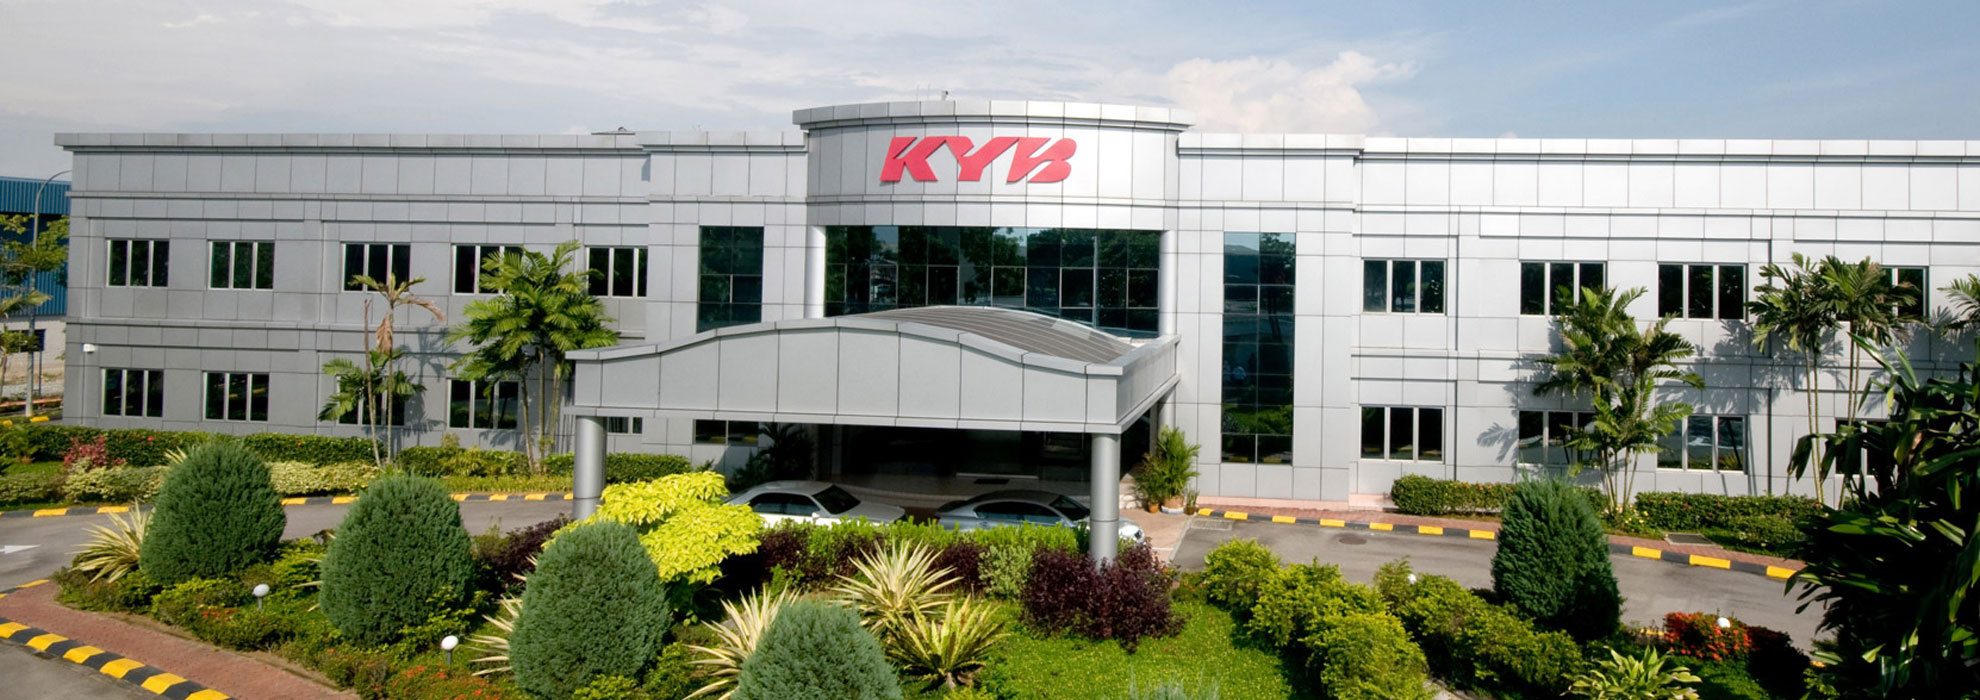 KYB Building